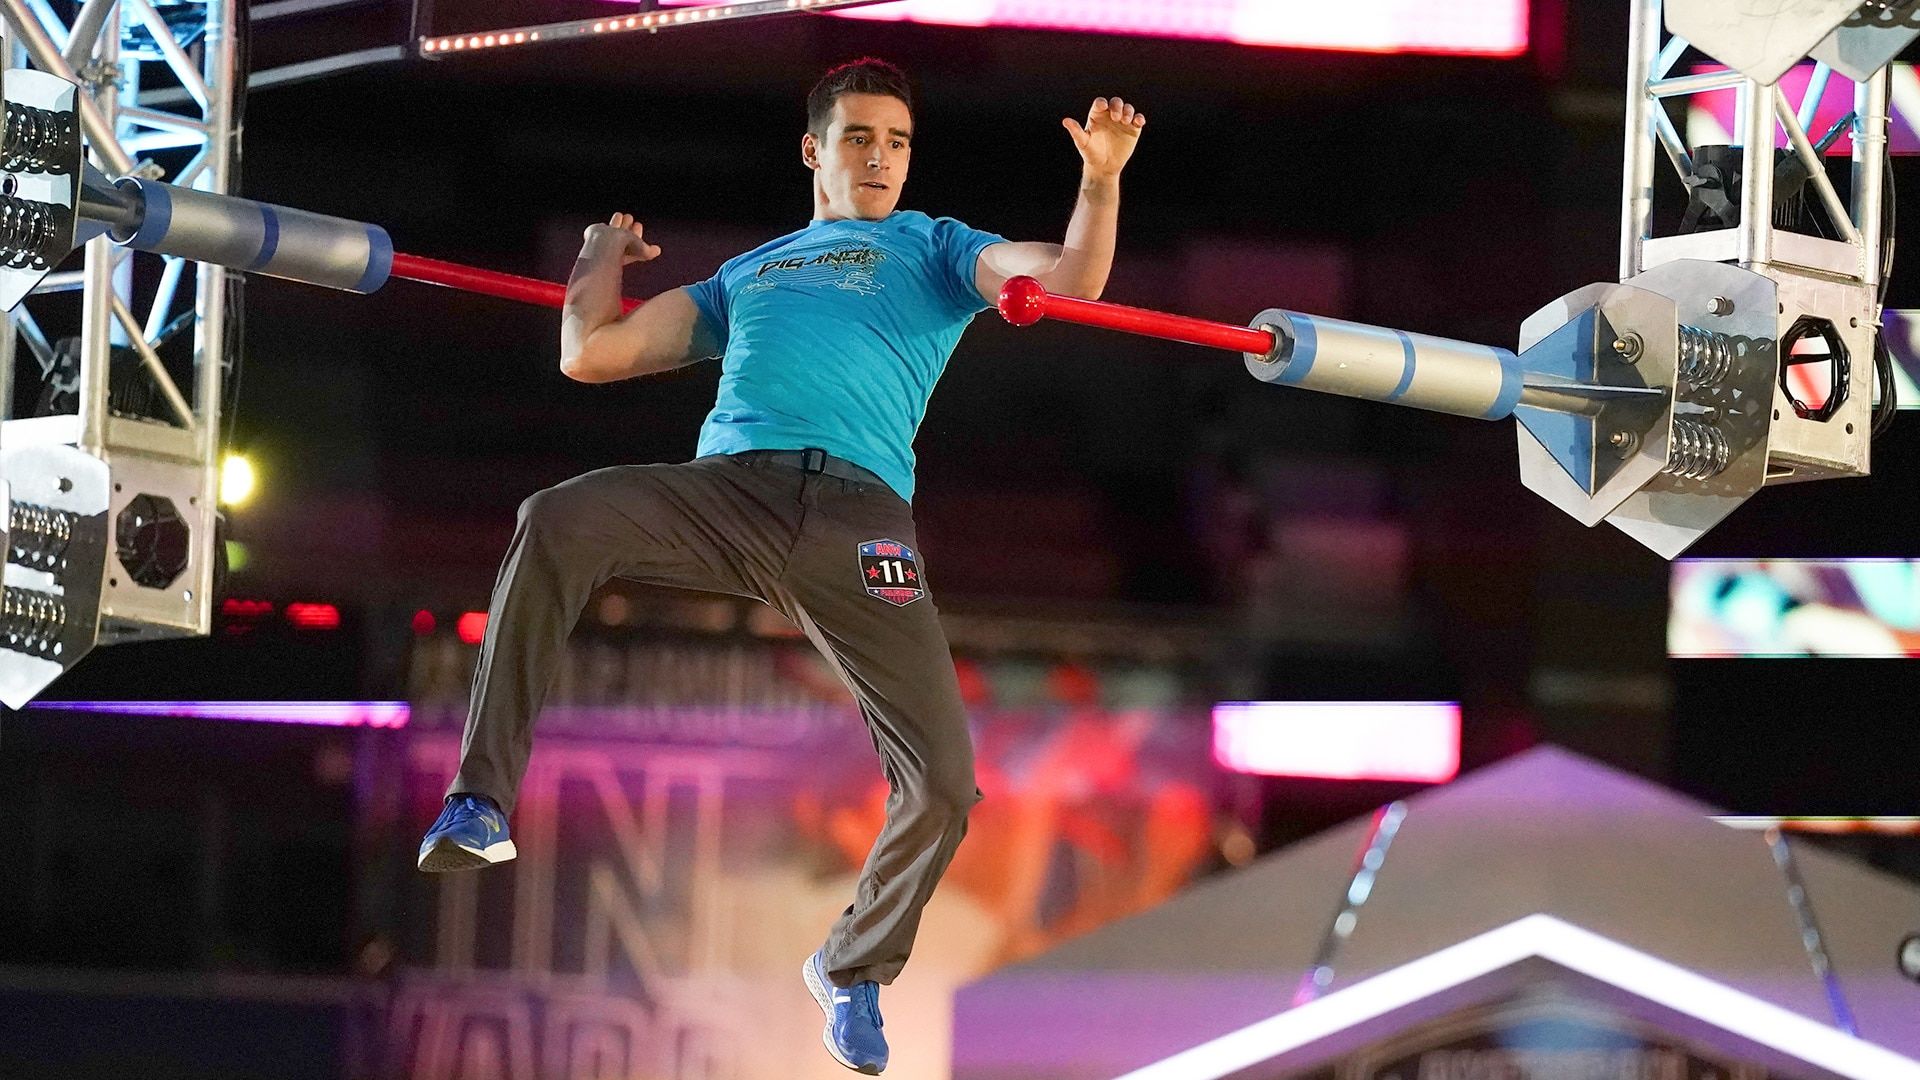 American Ninja Warrior Show Summary, Episodes and TV Guide